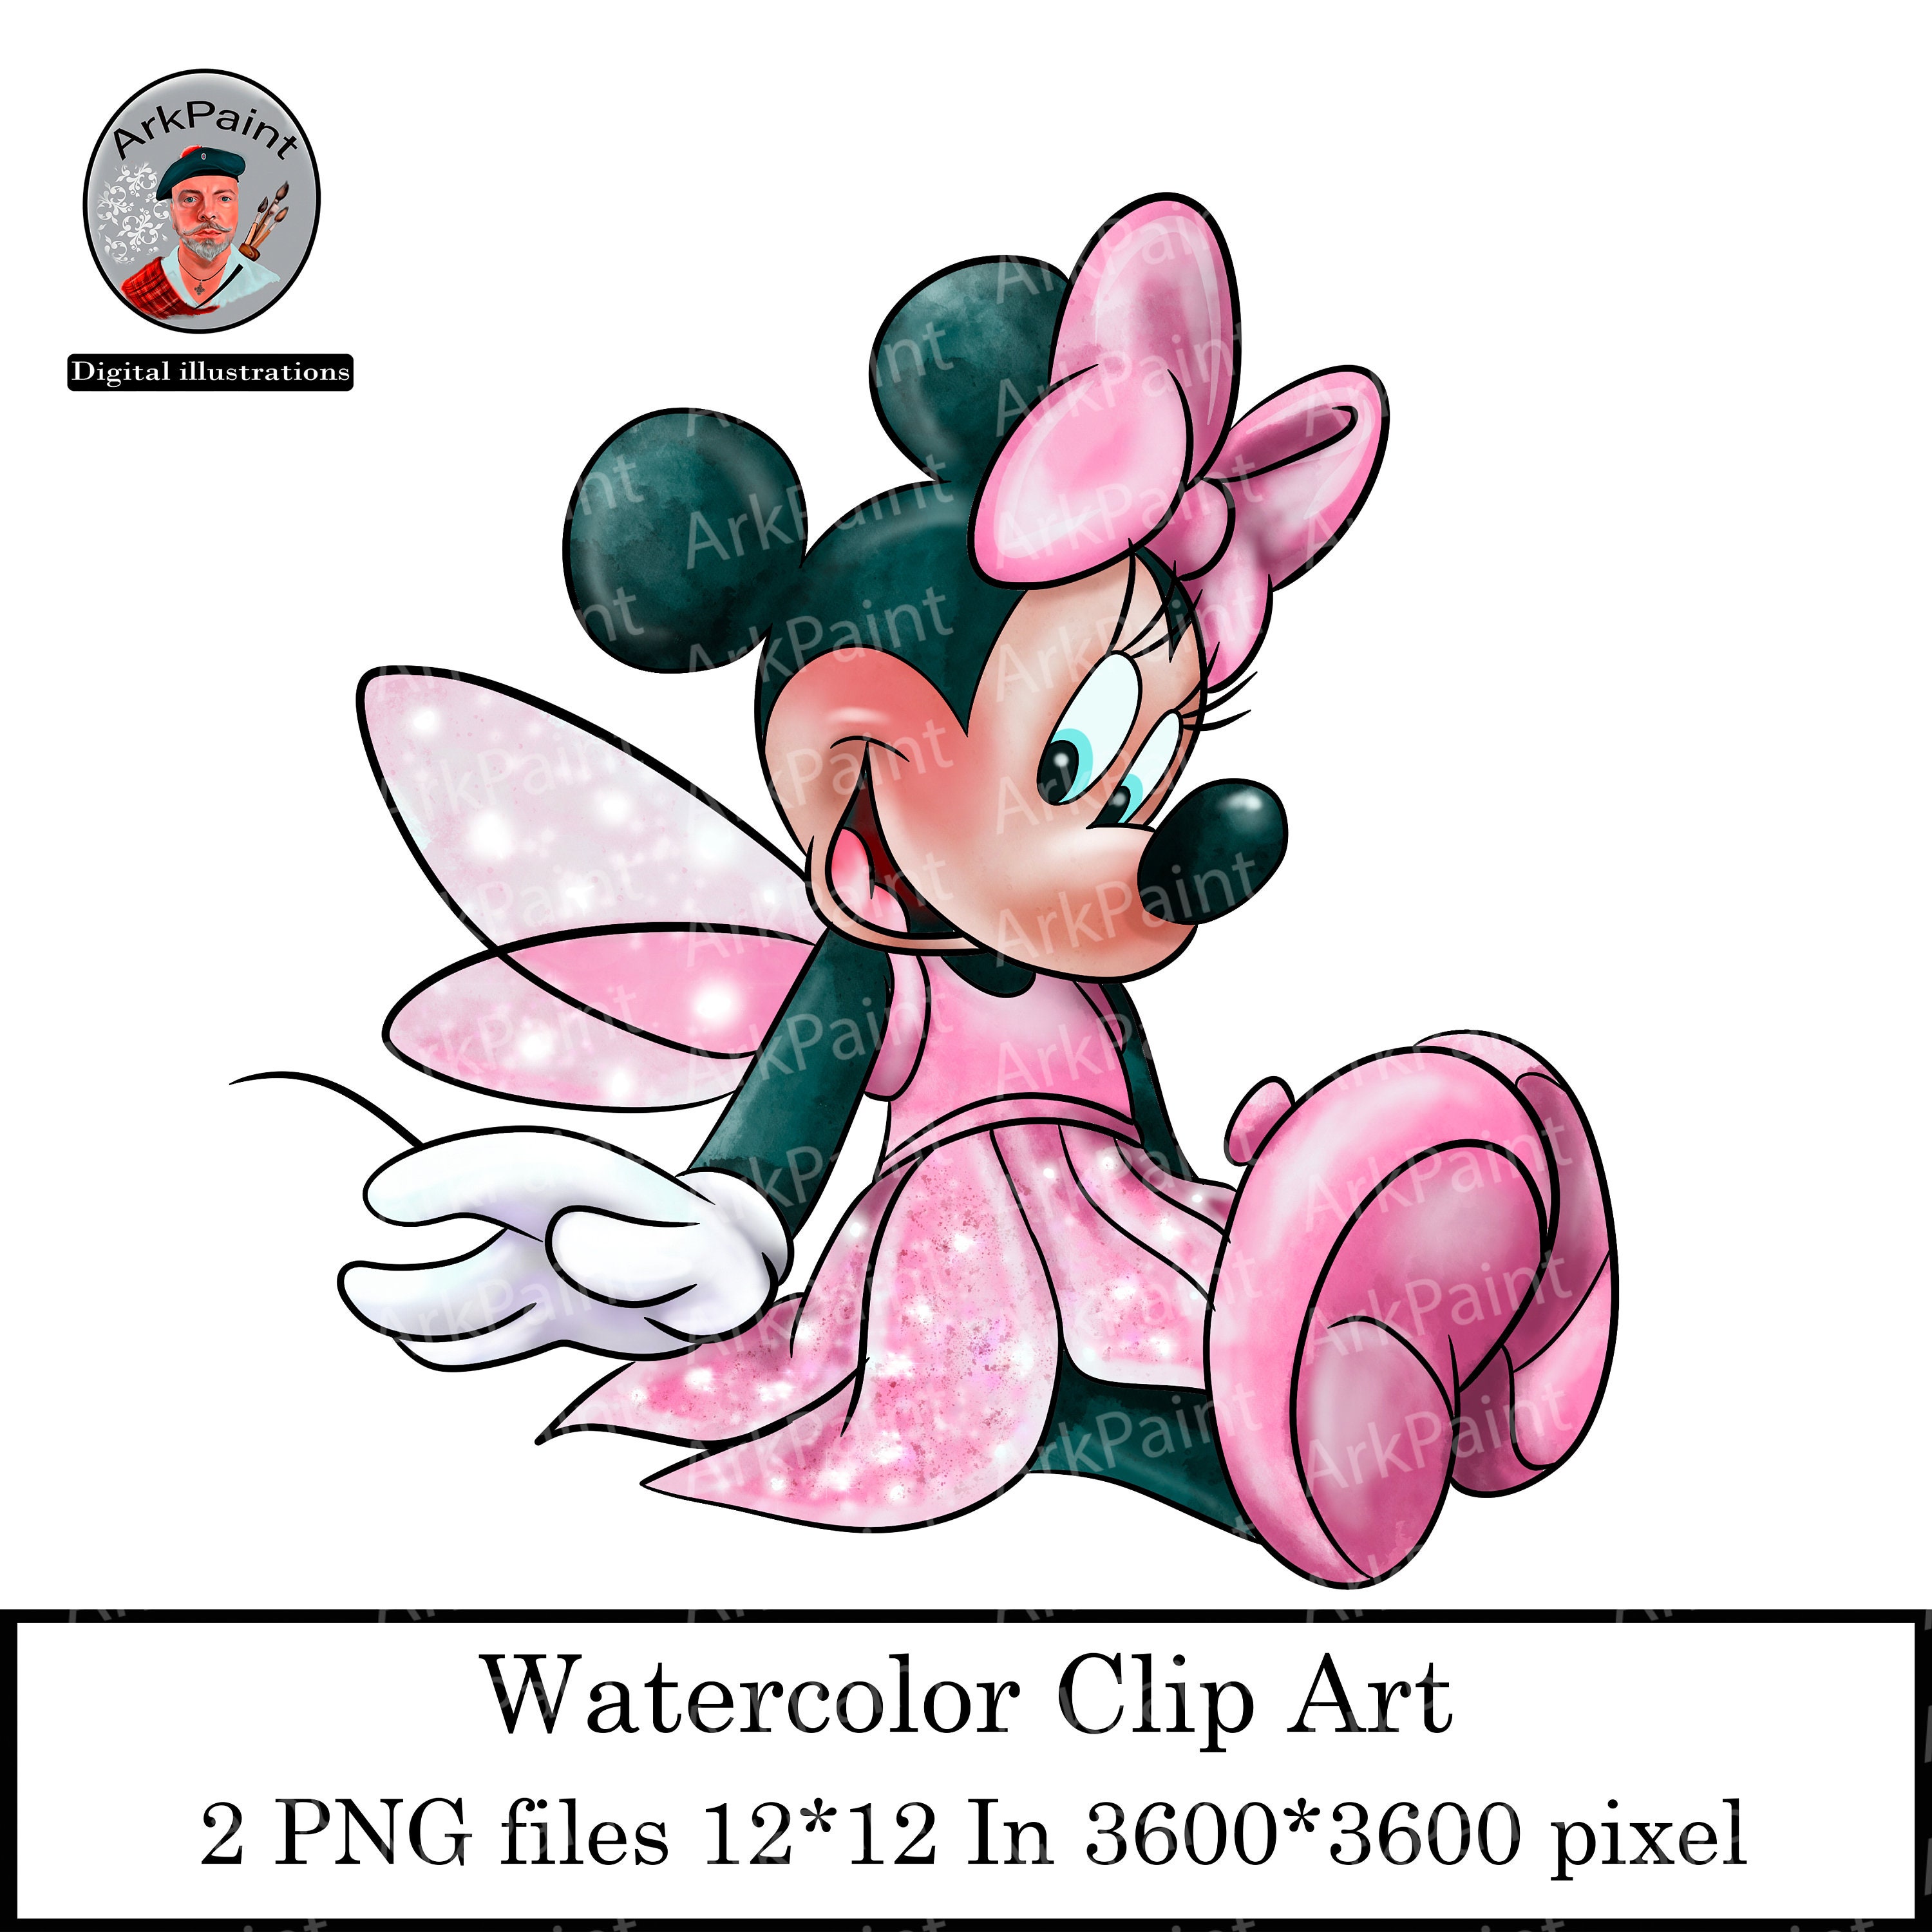 Minnie Mouse Coloring Page | Easy Drawing Guides